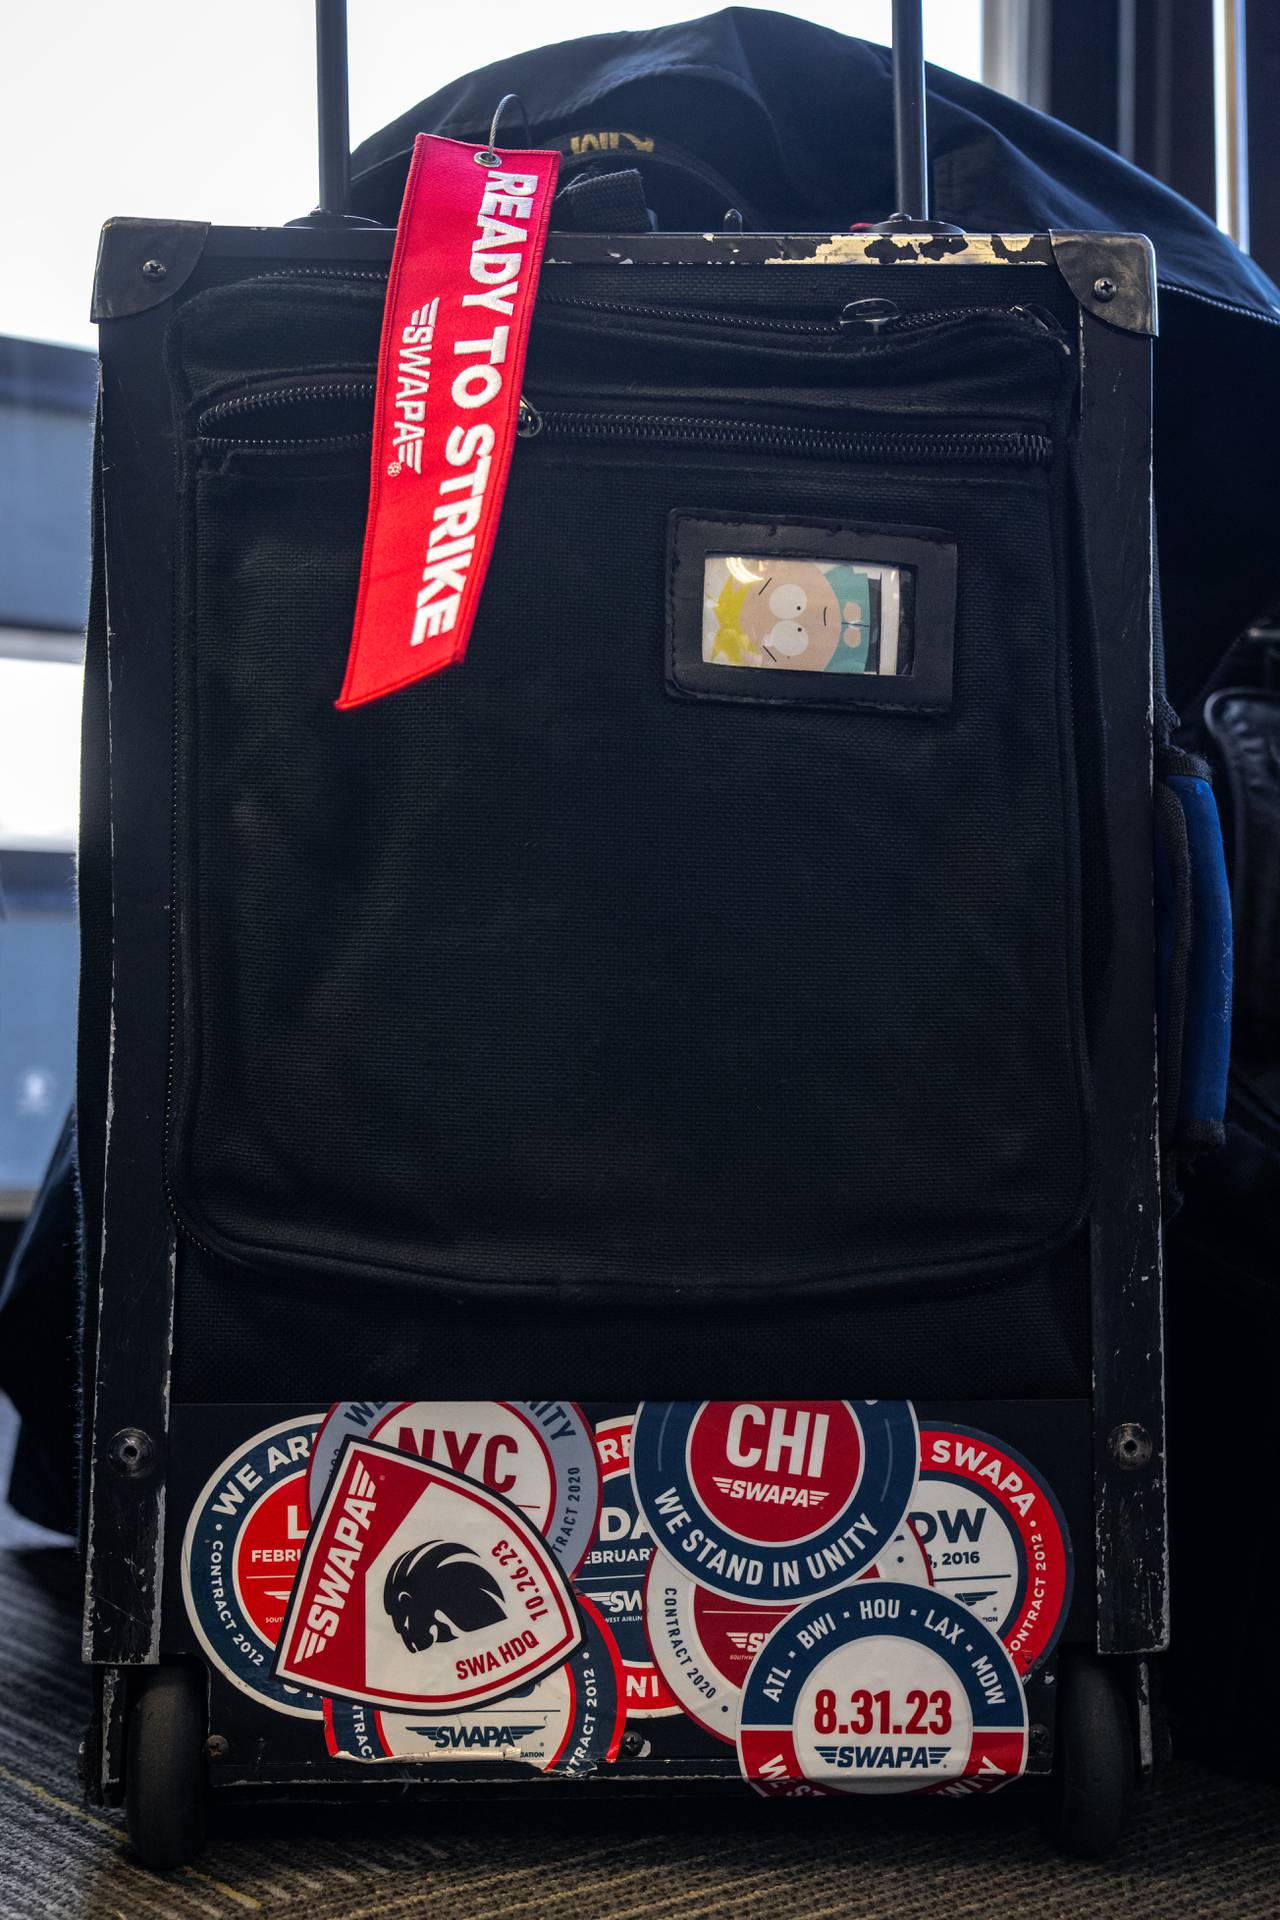 A pilot’s suitcase has a variety of stickers and a luggage tag in support of the Southwest Airlines Pilots Association union.